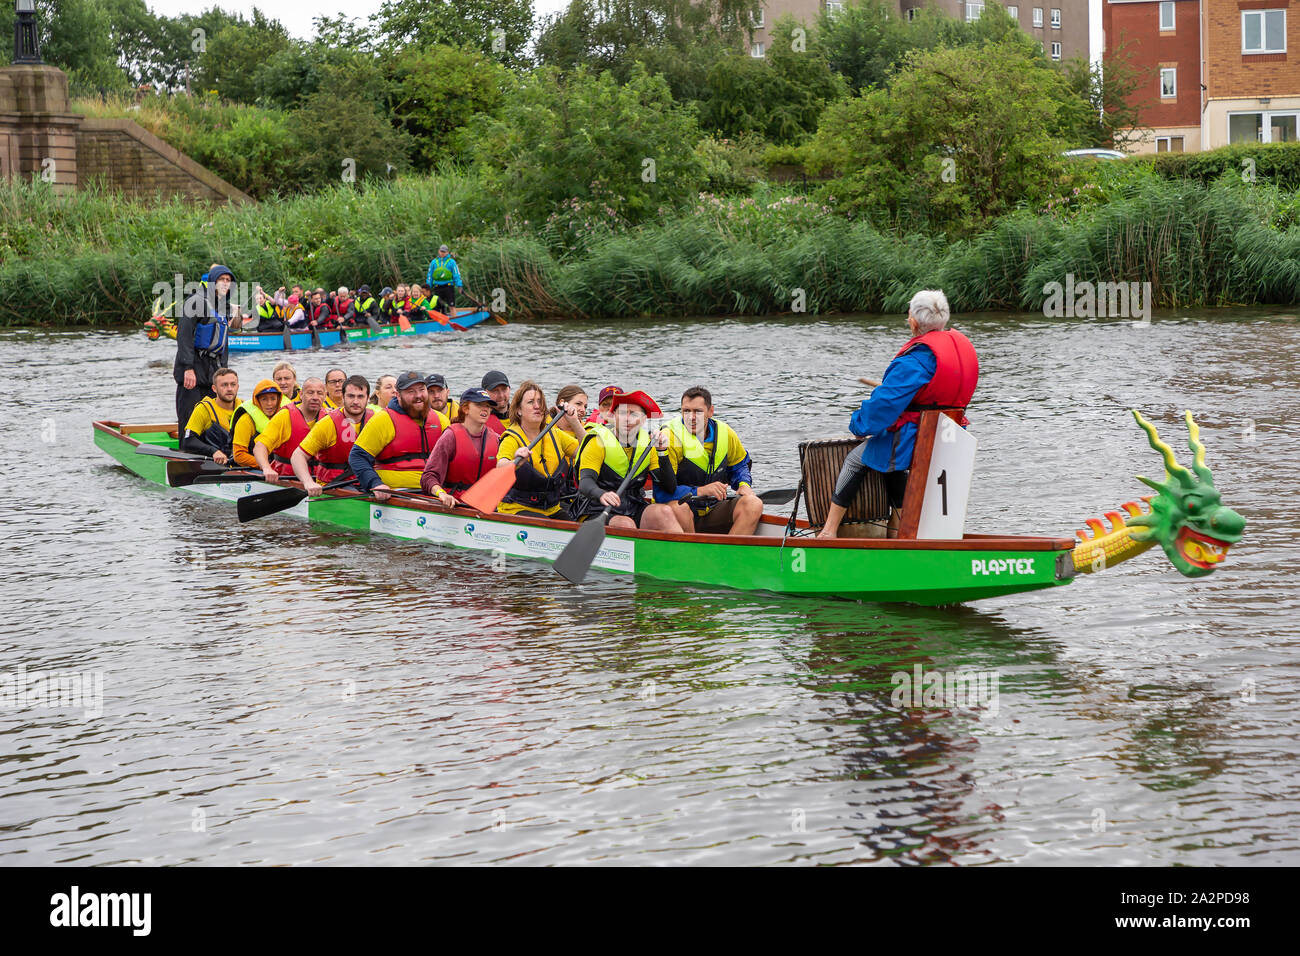 The teams come to the river edge at the end of the Dragon Boat Race 2019 in aid of St Rocco's Hospice, held at Warrington Rowing Club, Cheshire, Engla Stock Photo